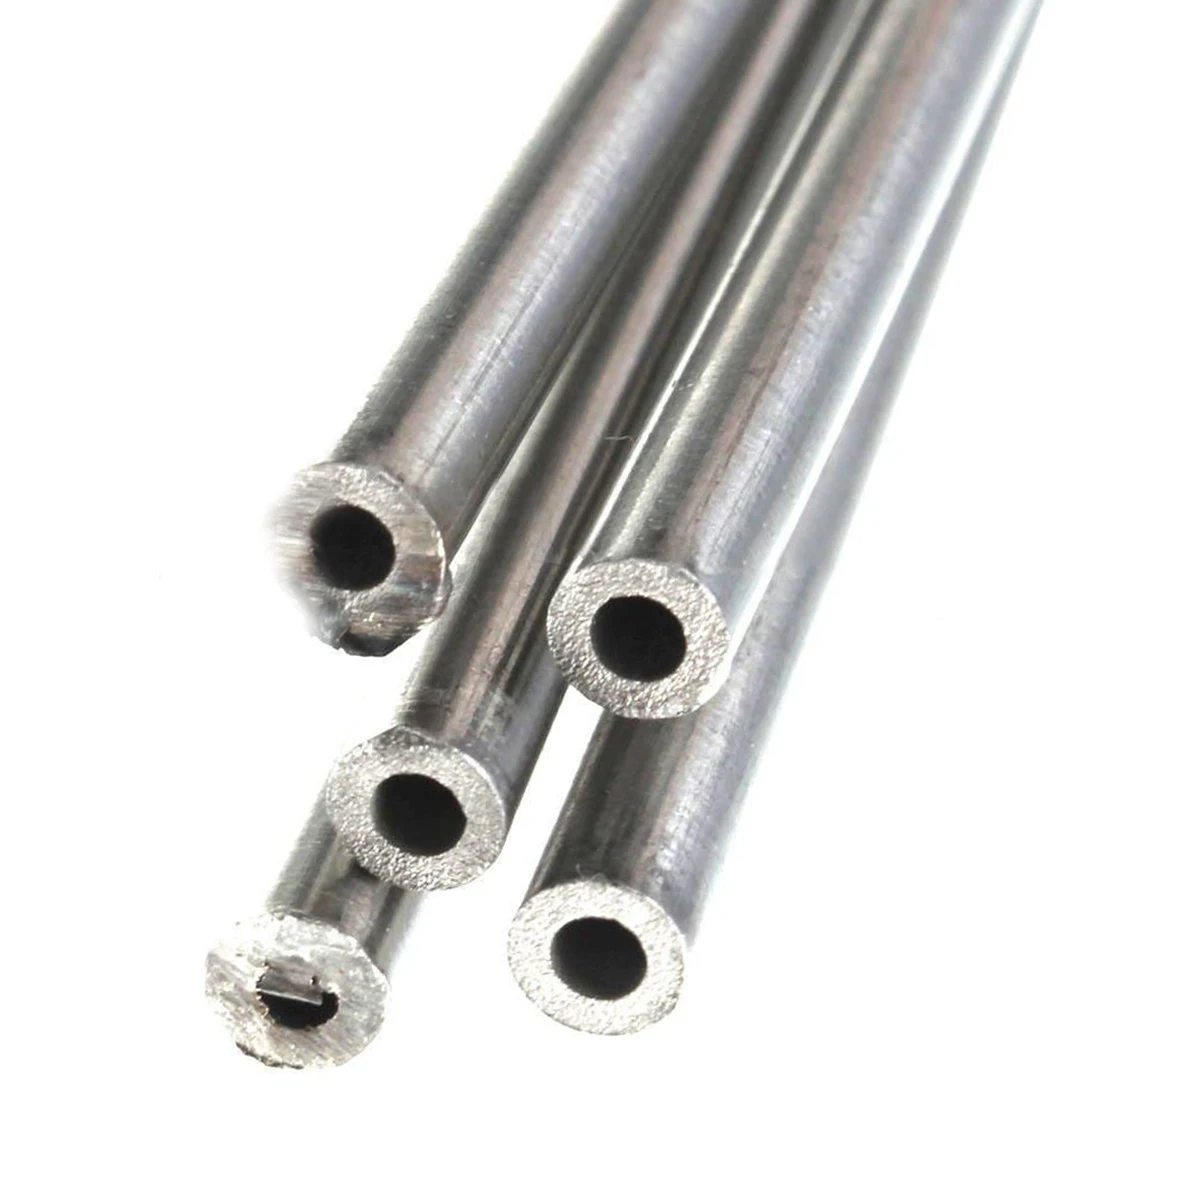 5pcs New Silver 304 Stainless Steel Capillary Tube 3mm OD 2mm ID 250mm Length